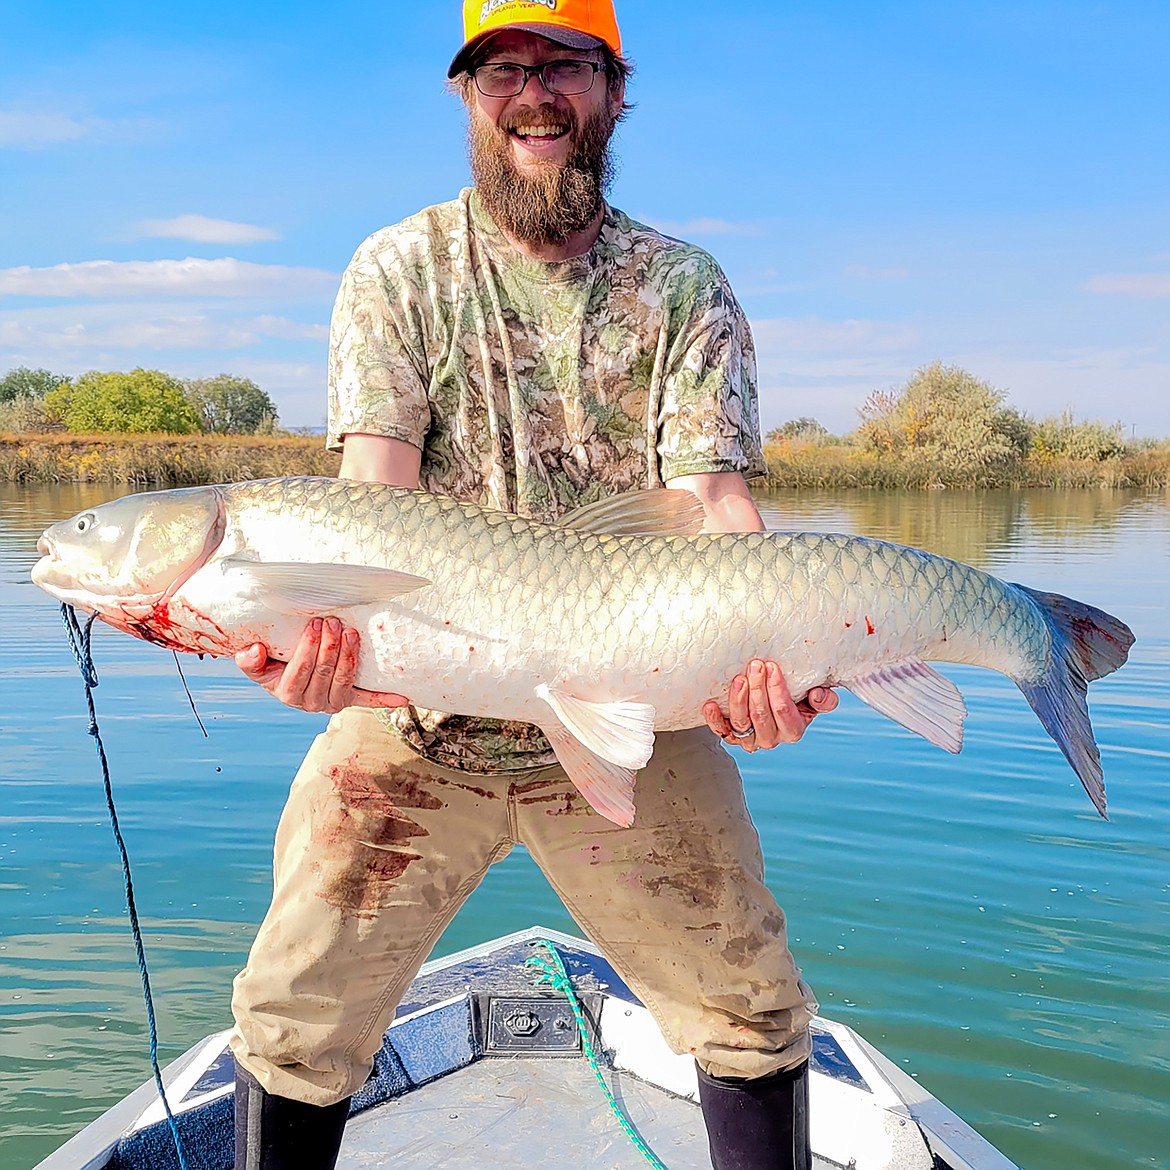 Cris Endicott landed this 46.7-pound Snake River grass carp on Oct. 10. Measuring 50 inches long, it set a new rod/reel certified weight state record for the species.